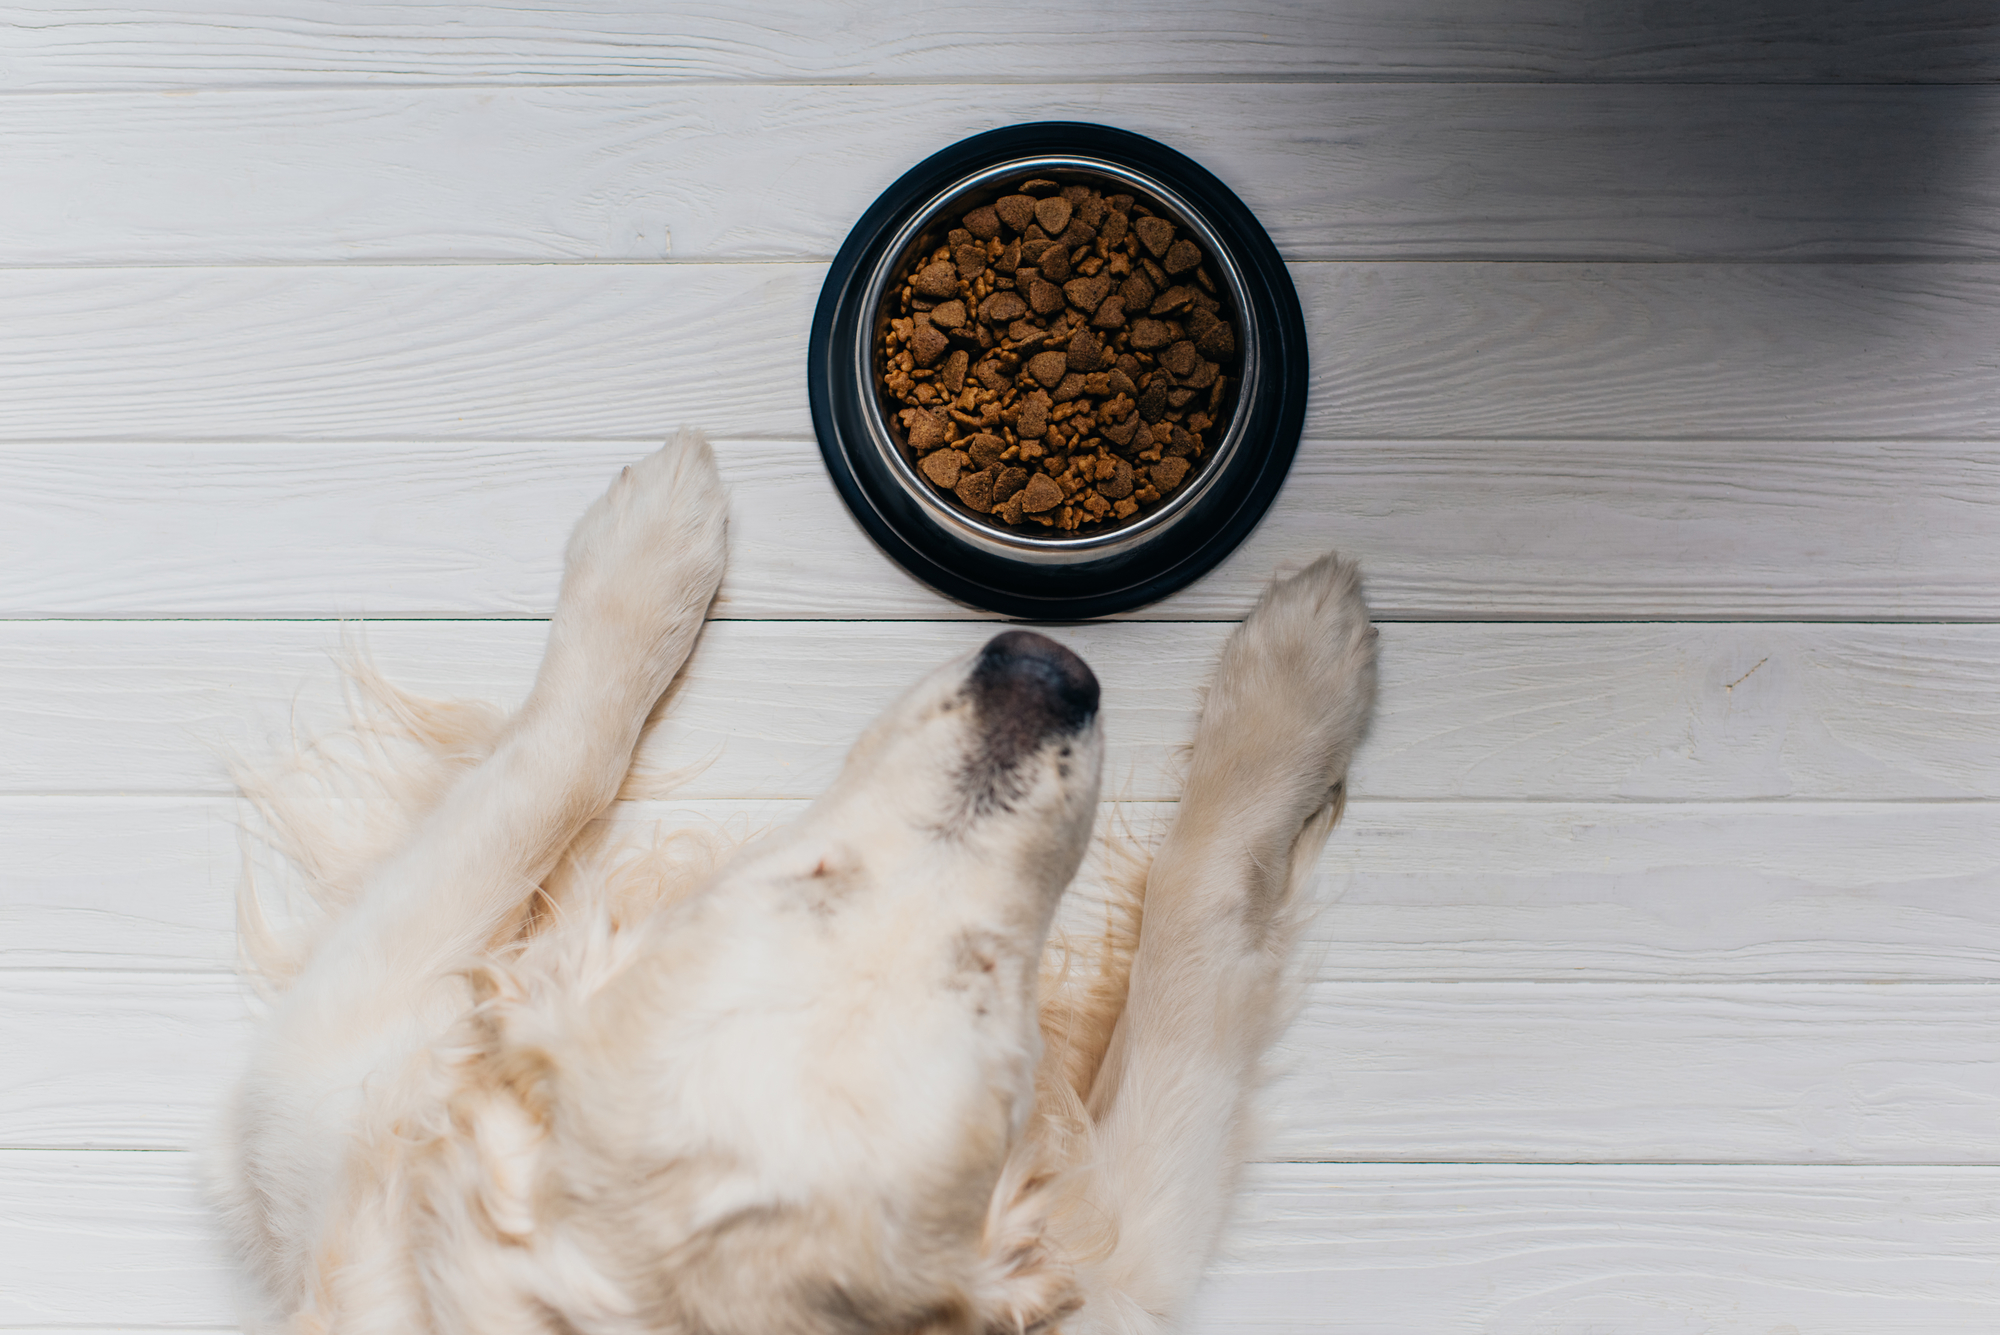 What You Need To Know About Designing a Pet Food Label